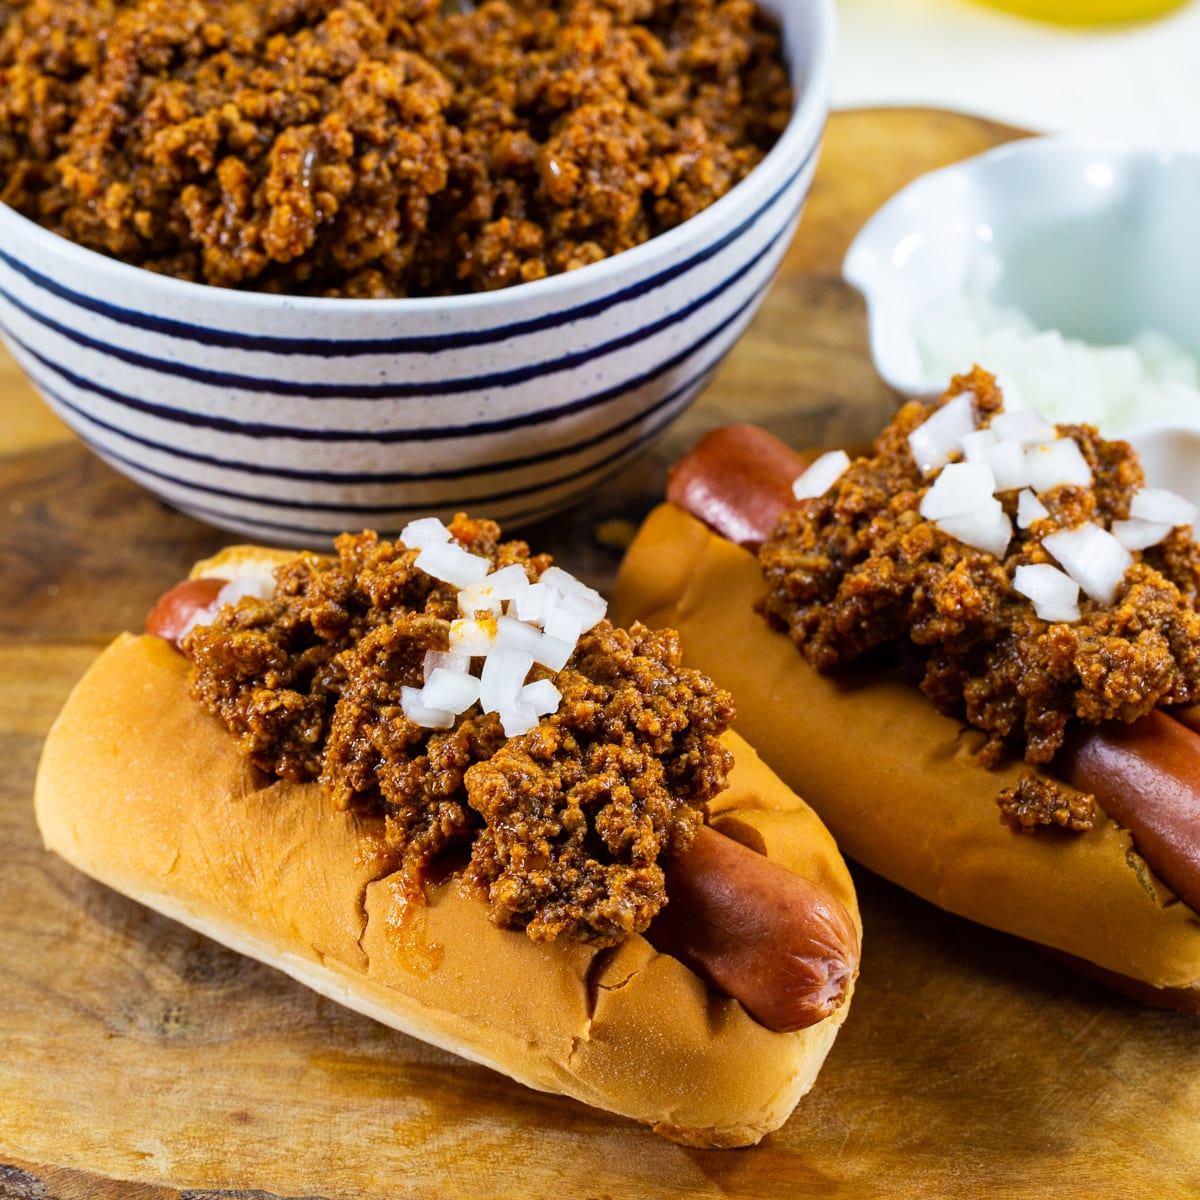 Two hot dogs topped with chili and onion.